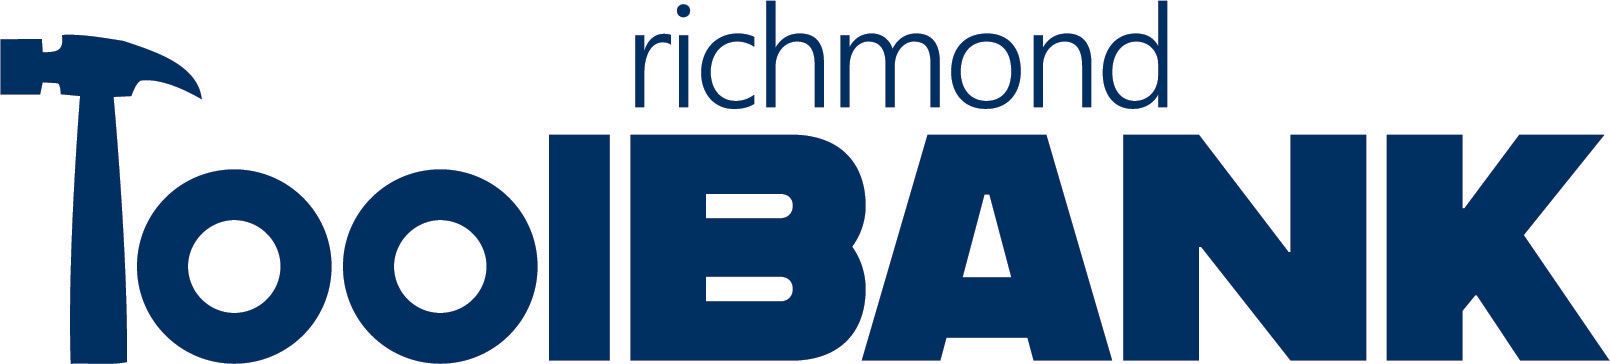 the richmond toolbank logo on we are river city community page